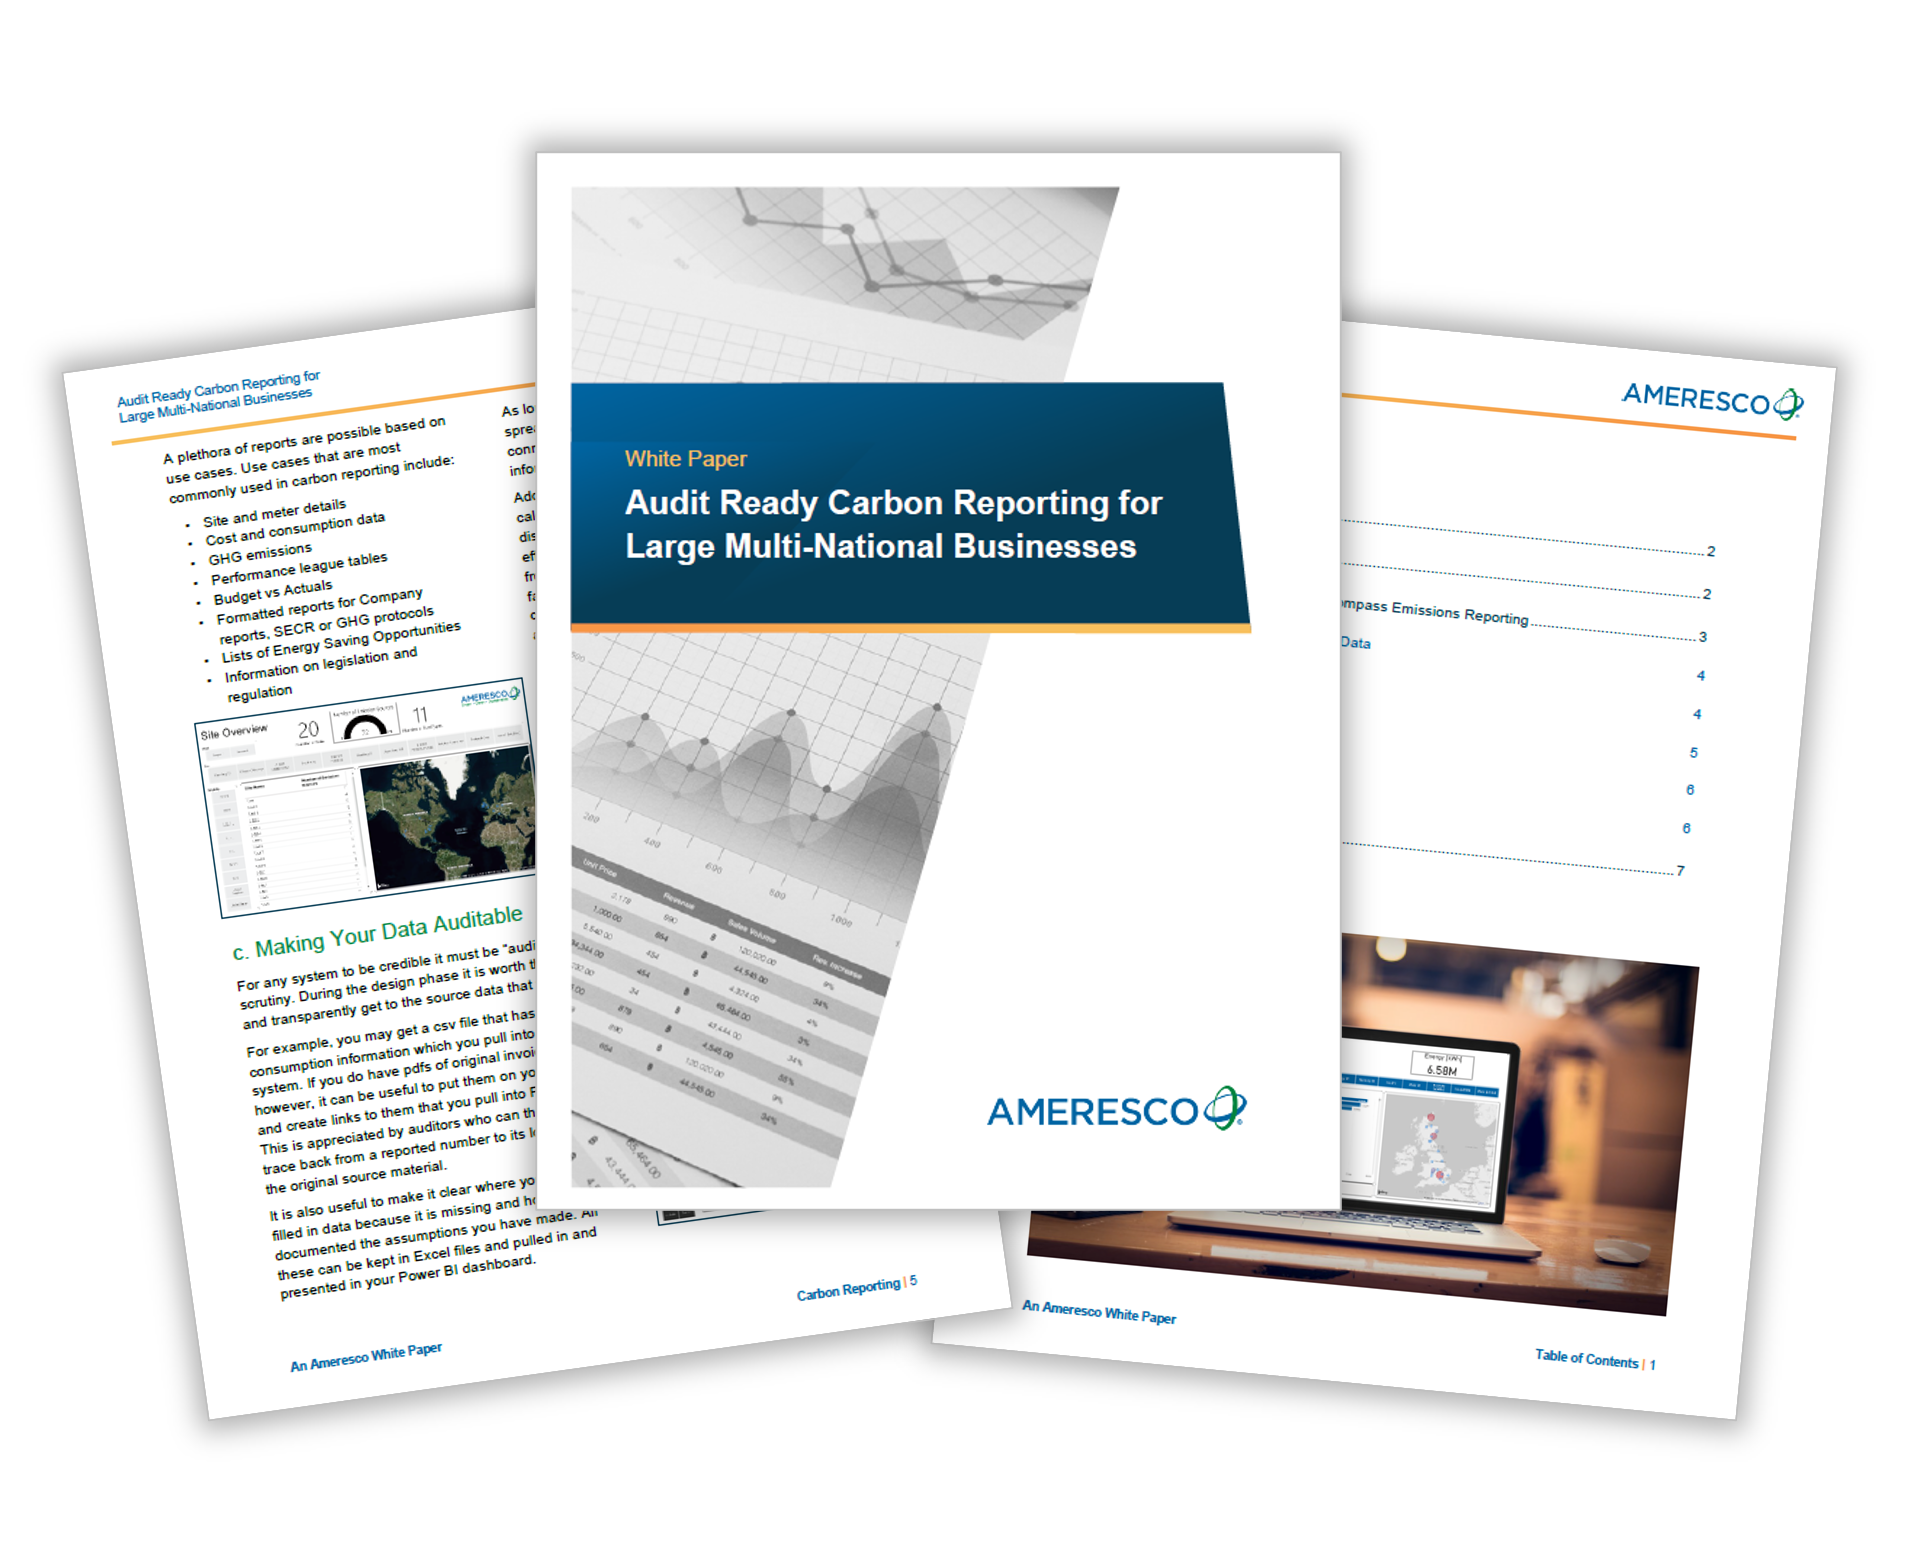 Images of the cover, table of contents and an interior page for the Ameresco White Paper "Audit Ready Carbon Reporting for Large Multi-National Businesses"